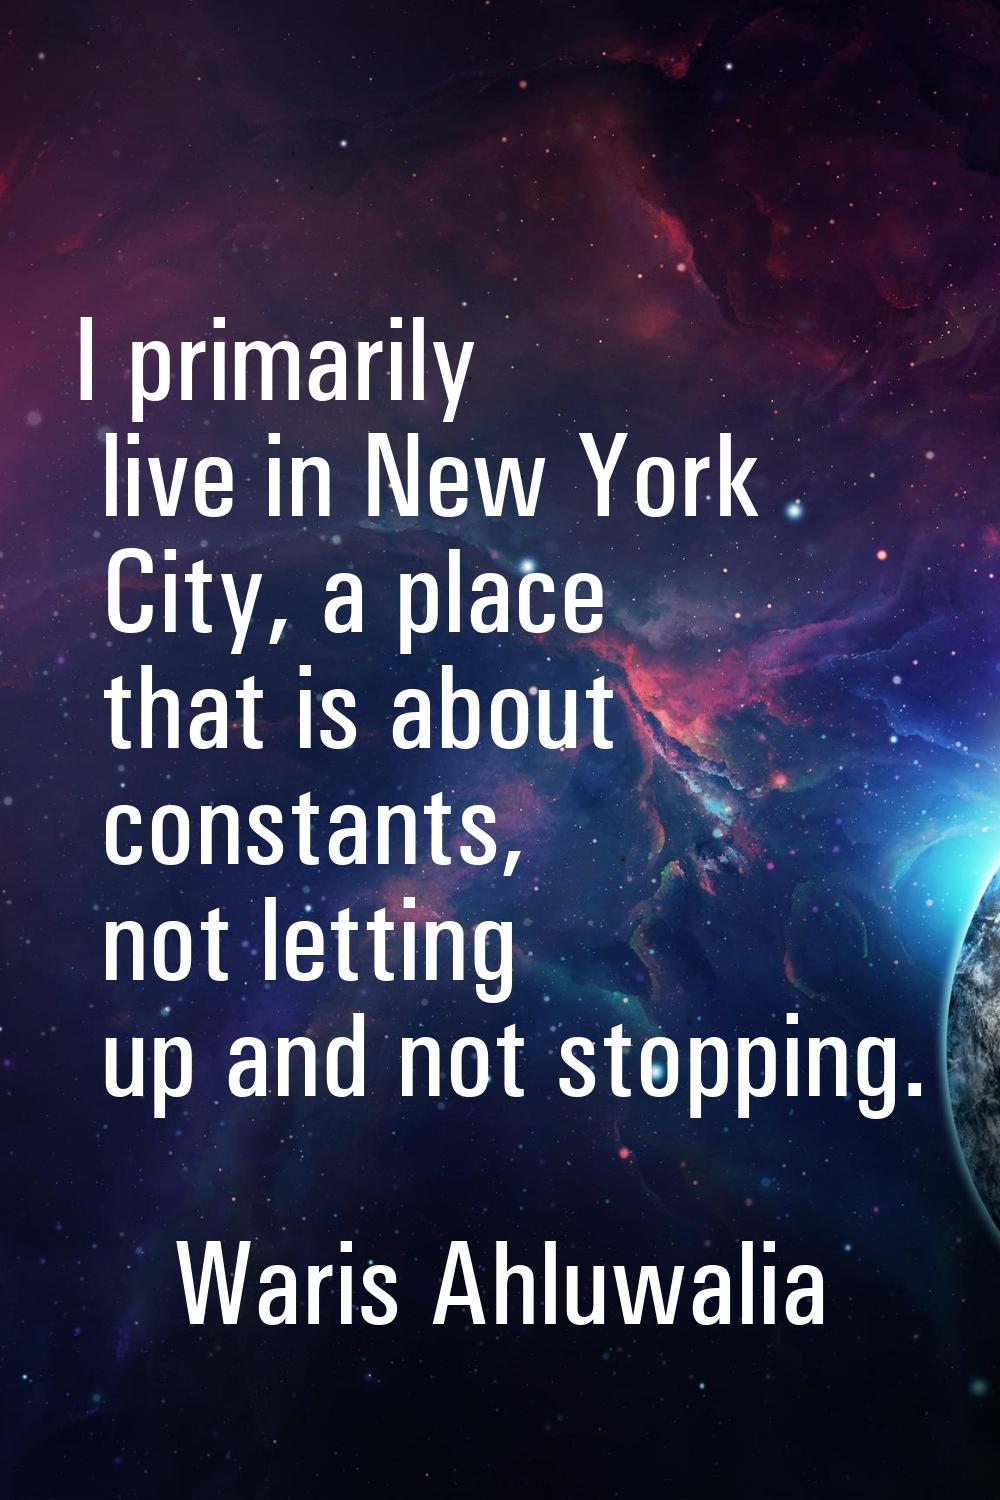 I primarily live in New York City, a place that is about constants, not letting up and not stopping